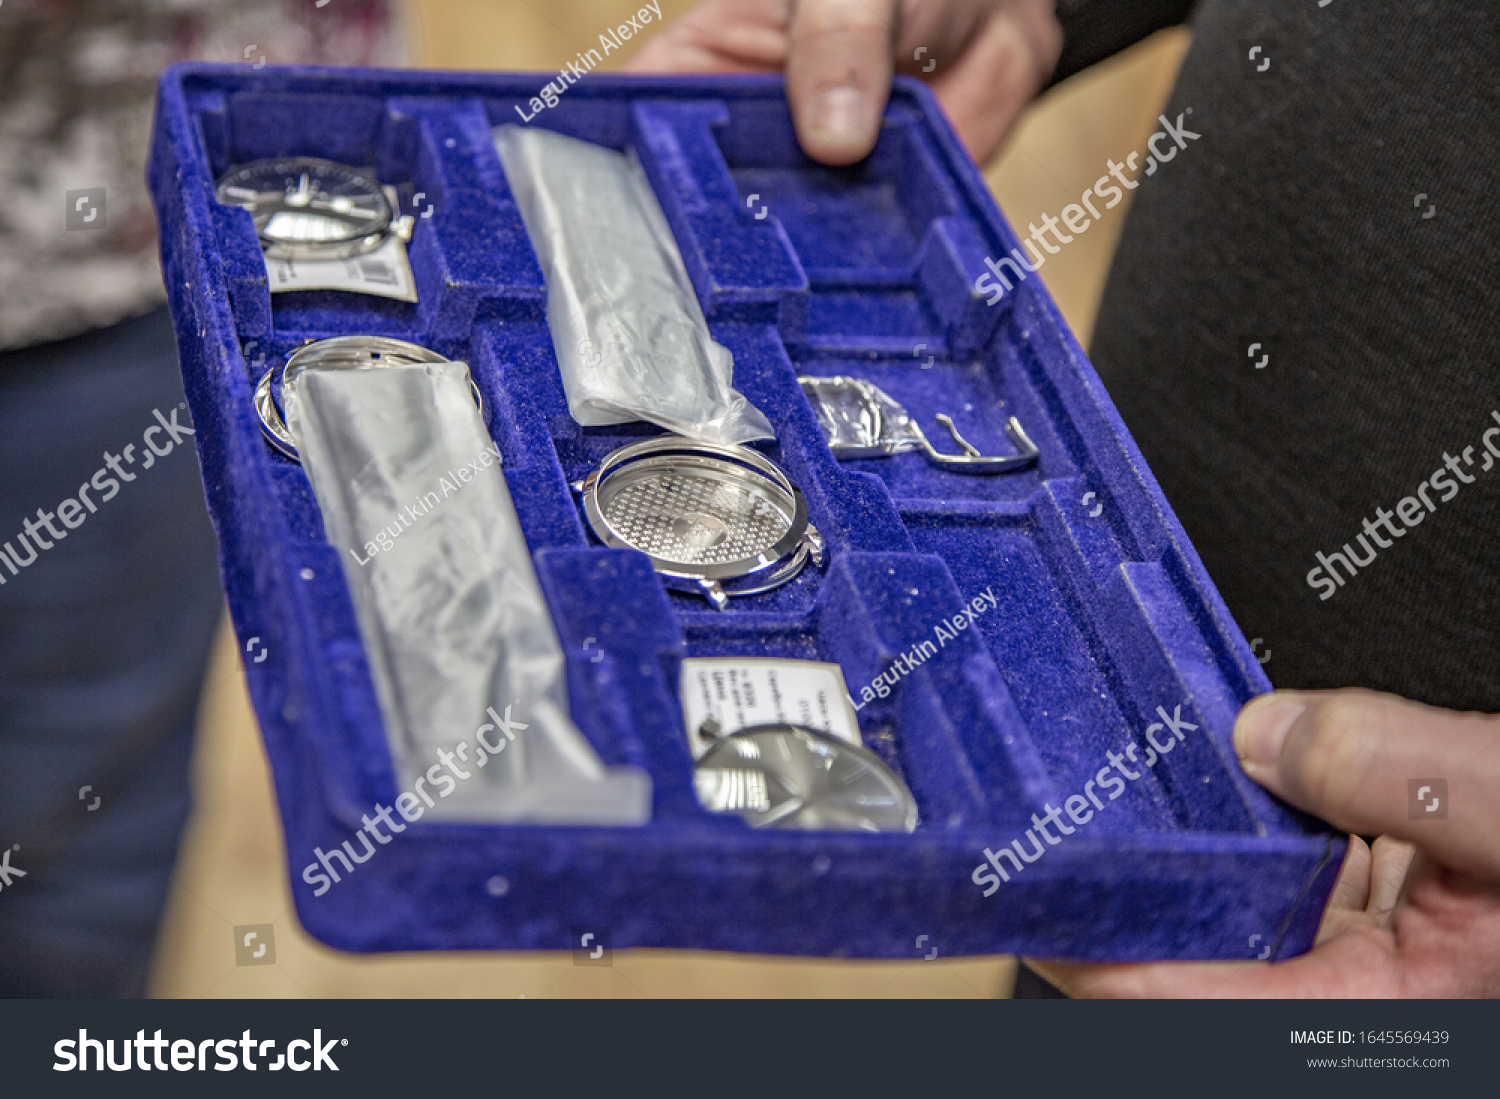 stock-photo-moscow-russia-february-component-parts-of-the-watch-factory-nika-products-manufacture-1645569439.jpg